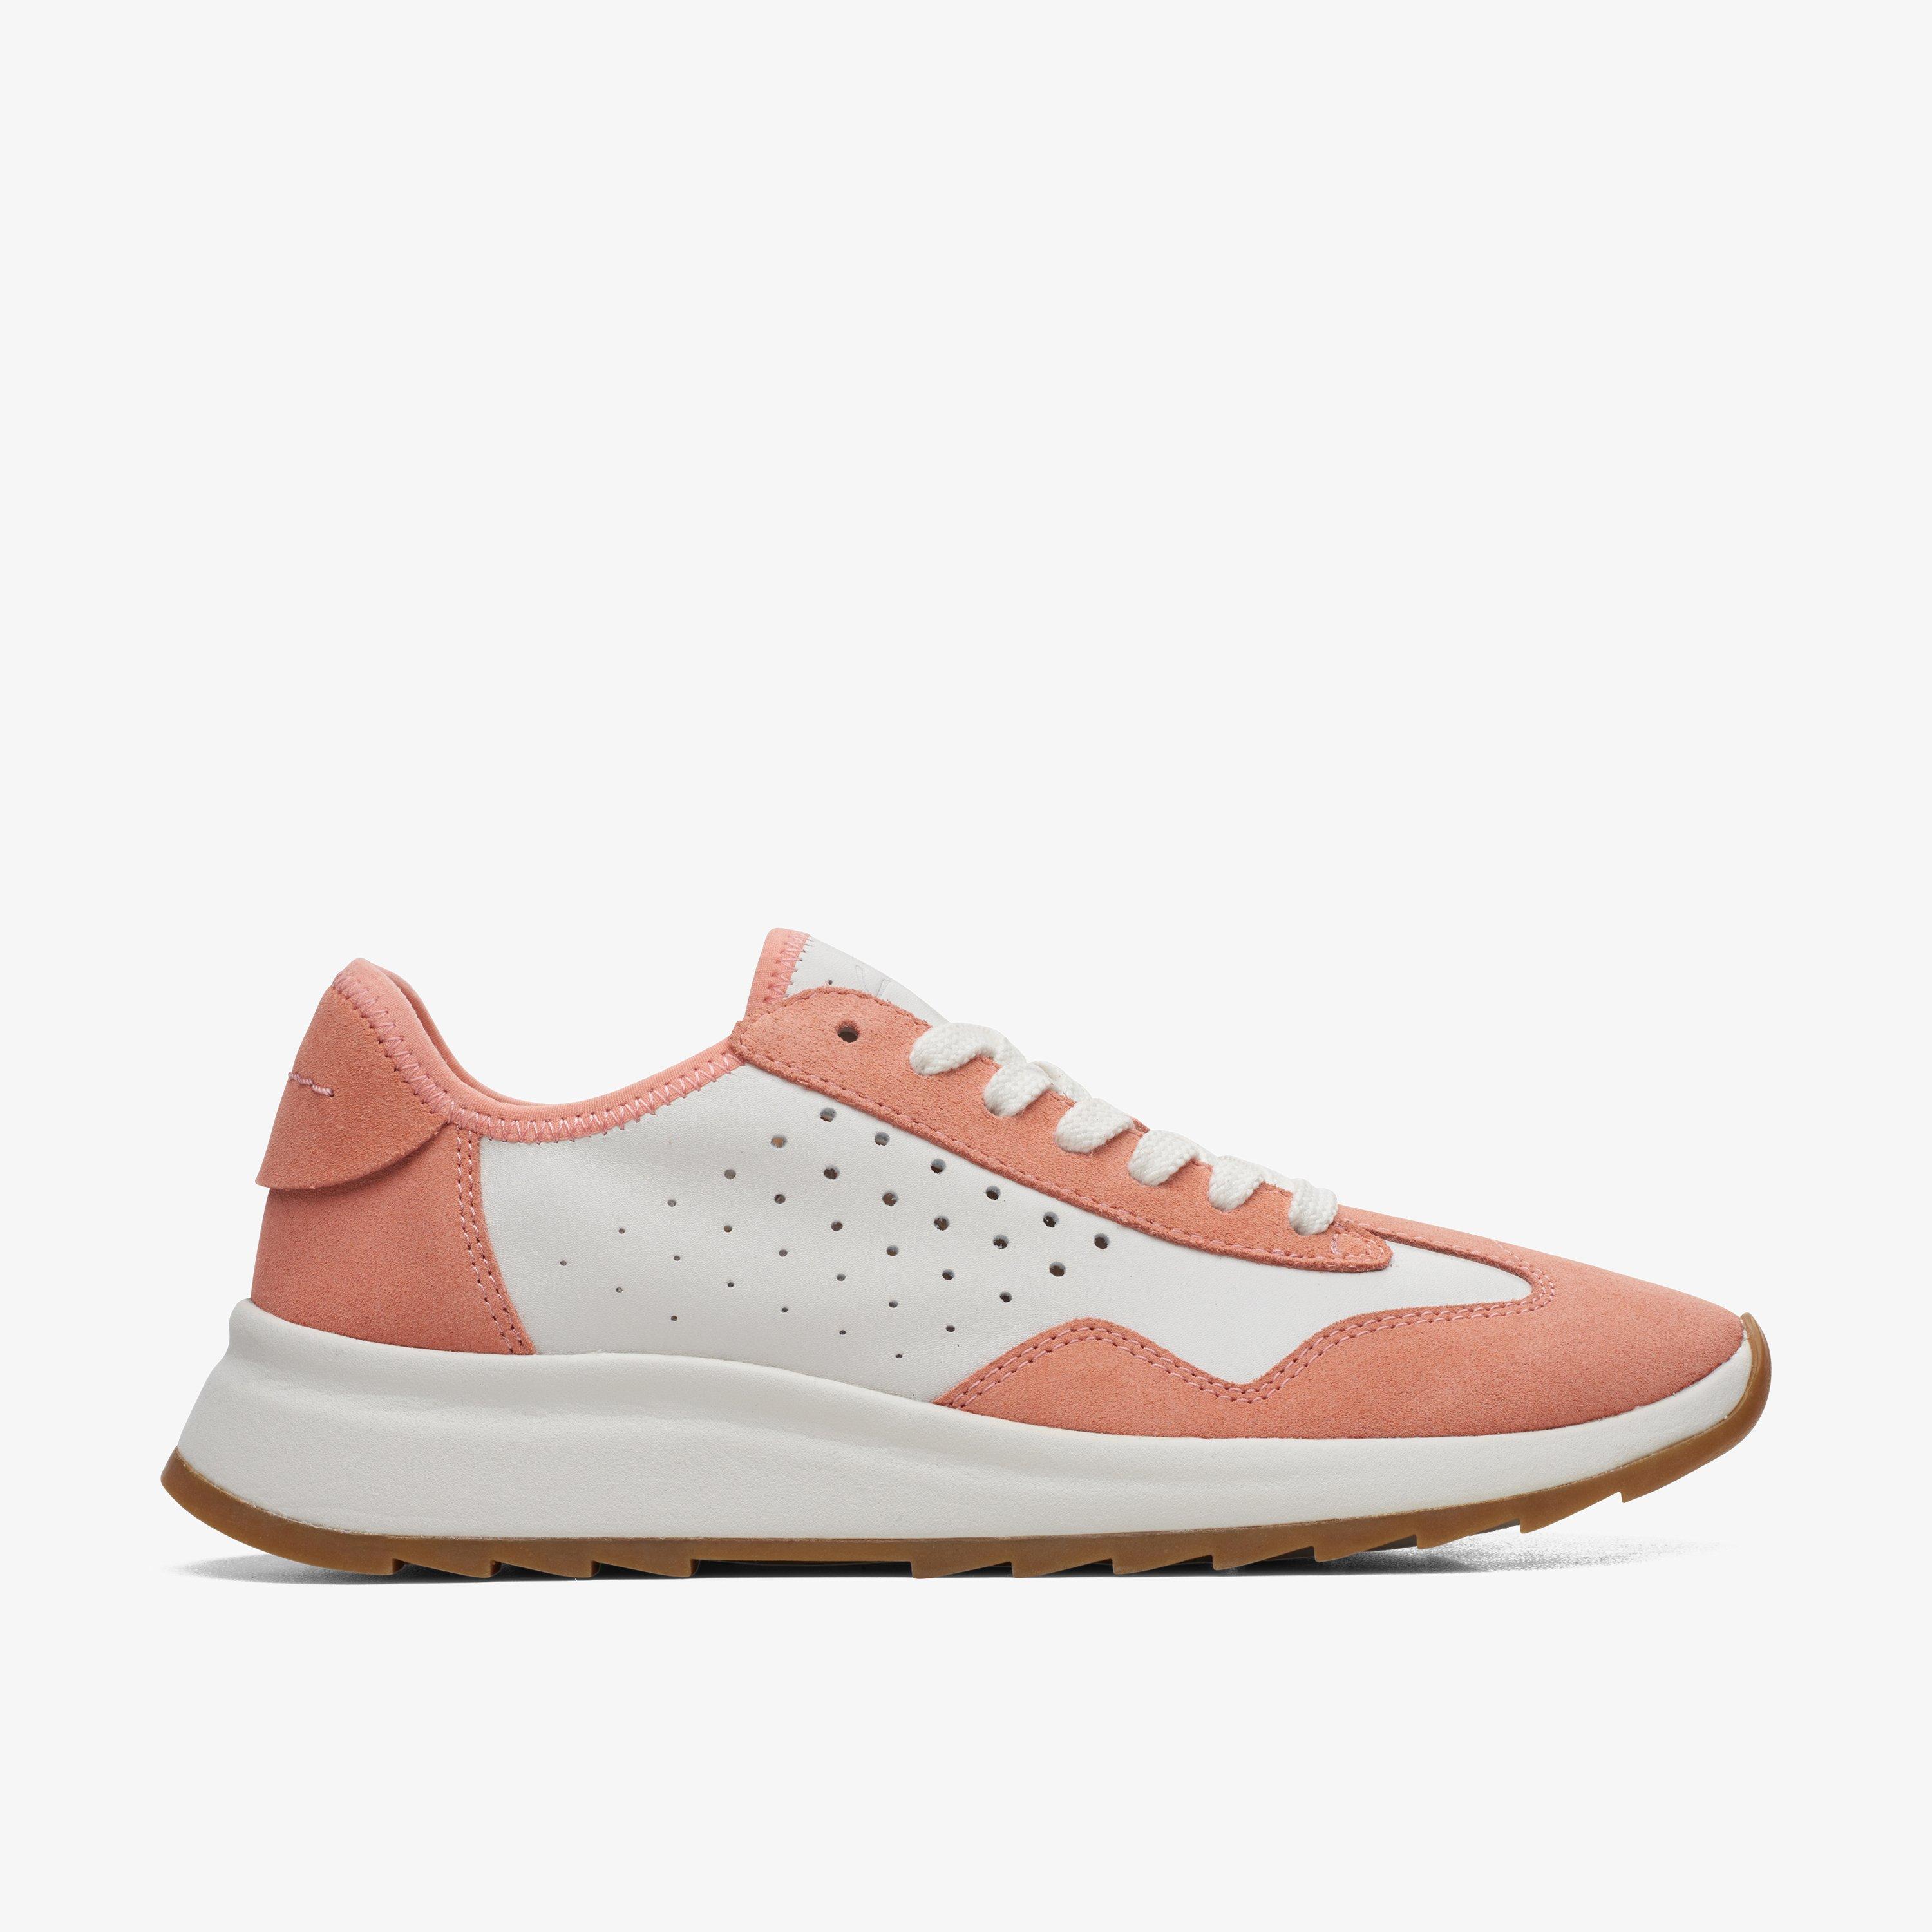 WOMENS DashLite Lace Coral/White Trainers | Clarks Outlet